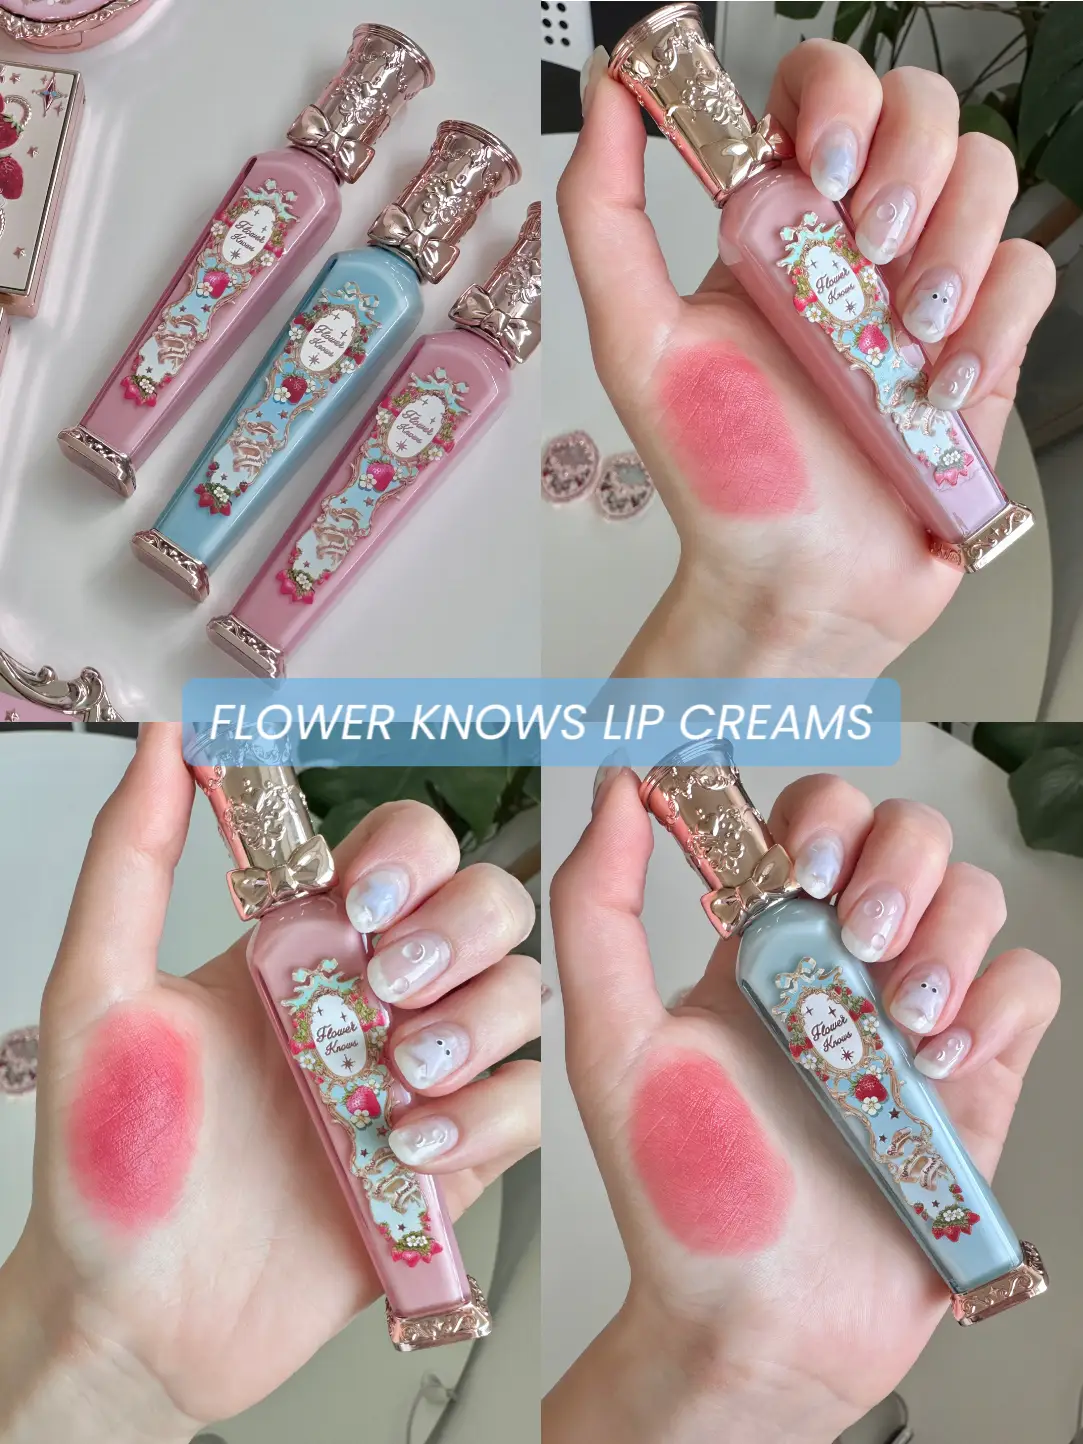 The most beautiful lip creams 🍓☁️, Gallery posted by Claude